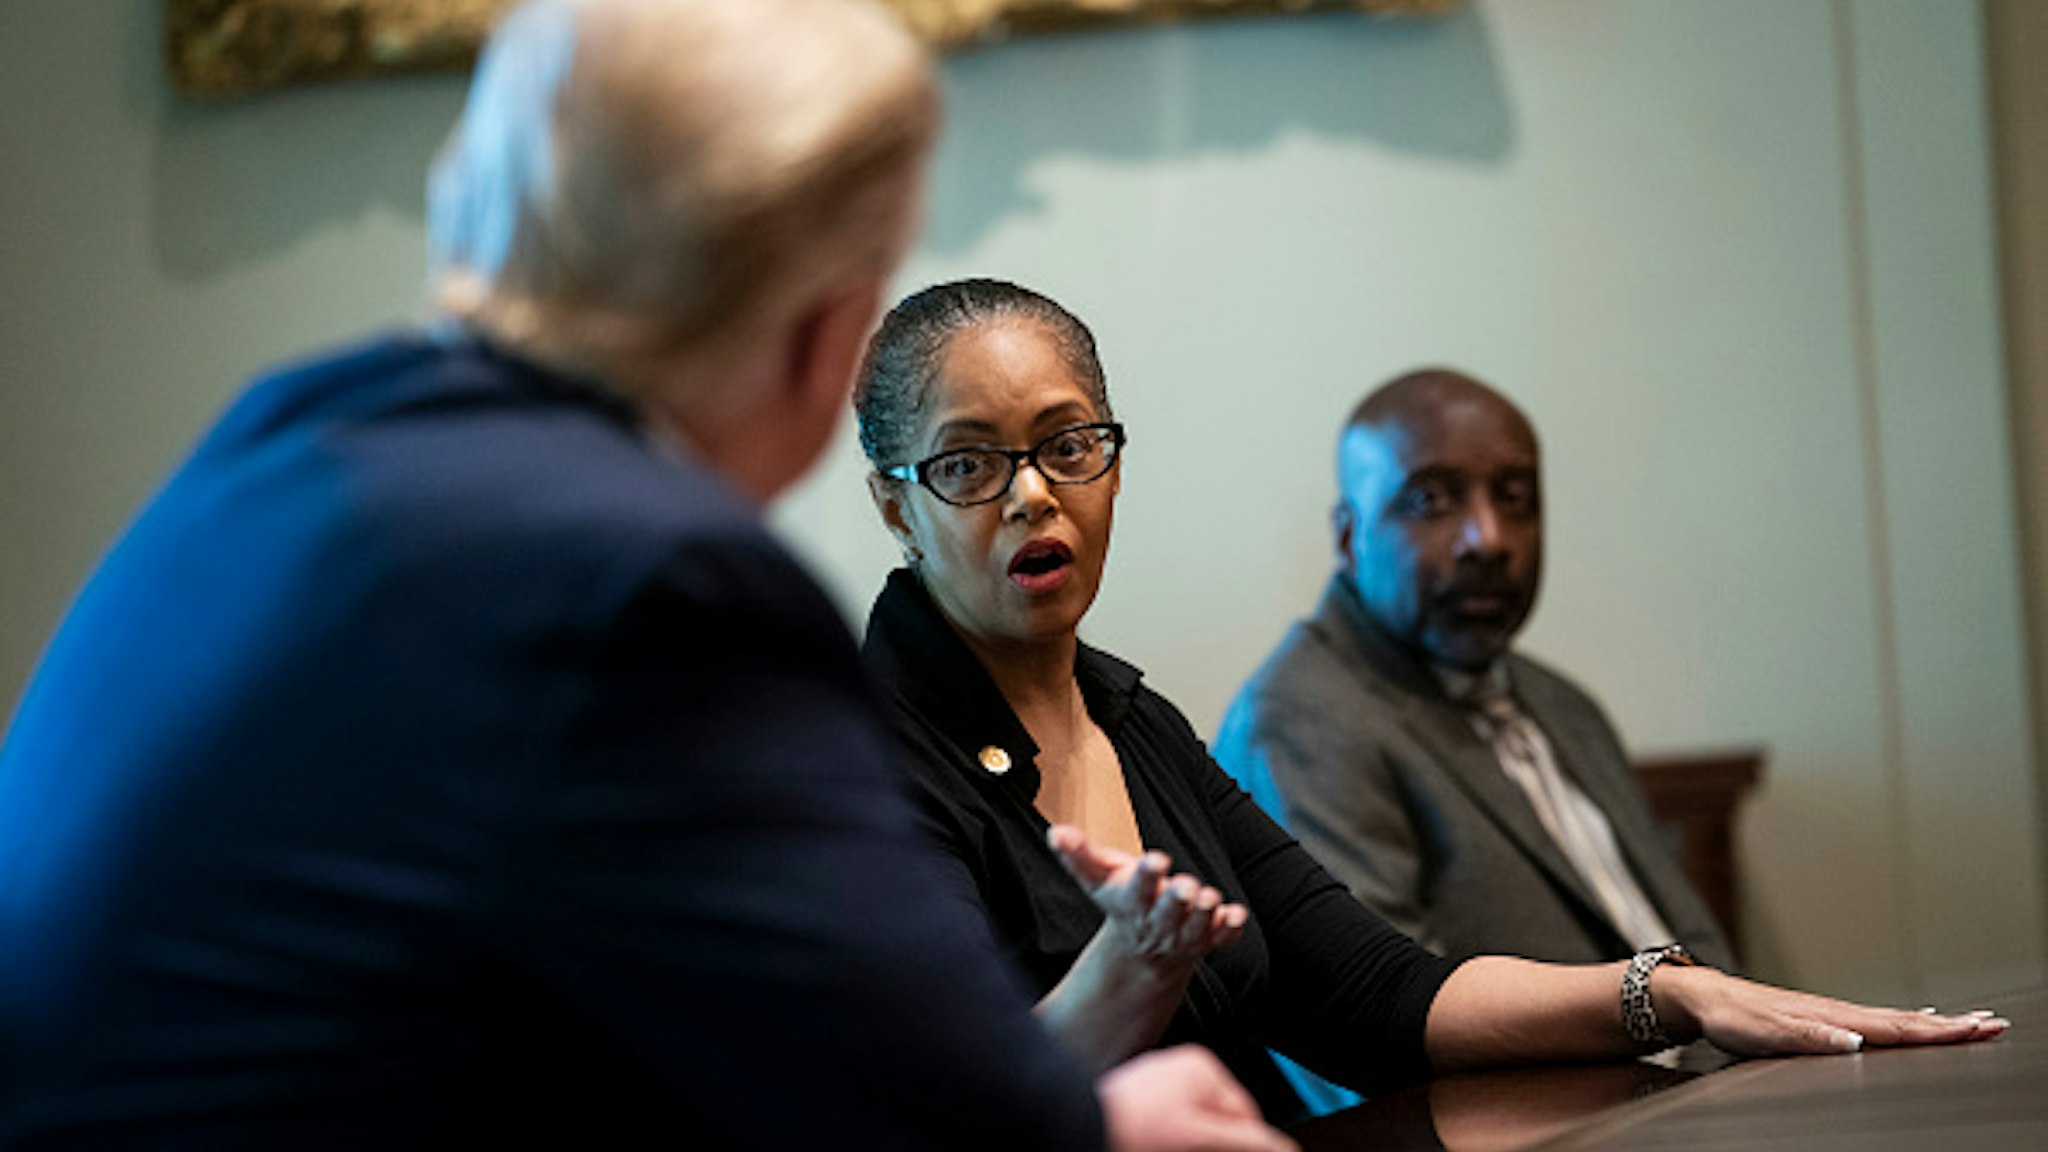 WASHINGTON, DC - APRIL 14: State Rep. Karen Whitsett of Michigan, talks about her bout with the coronavirus as President Donald Trump hosted a meeting with recovered COVID-19 patients in the Cabinet Room at the White House April 14, 2020 in Washington, D.C. During the April 13 Coronavirus Task Force briefing, Trump said the president had "total authority" to reopen the U.S. economy.